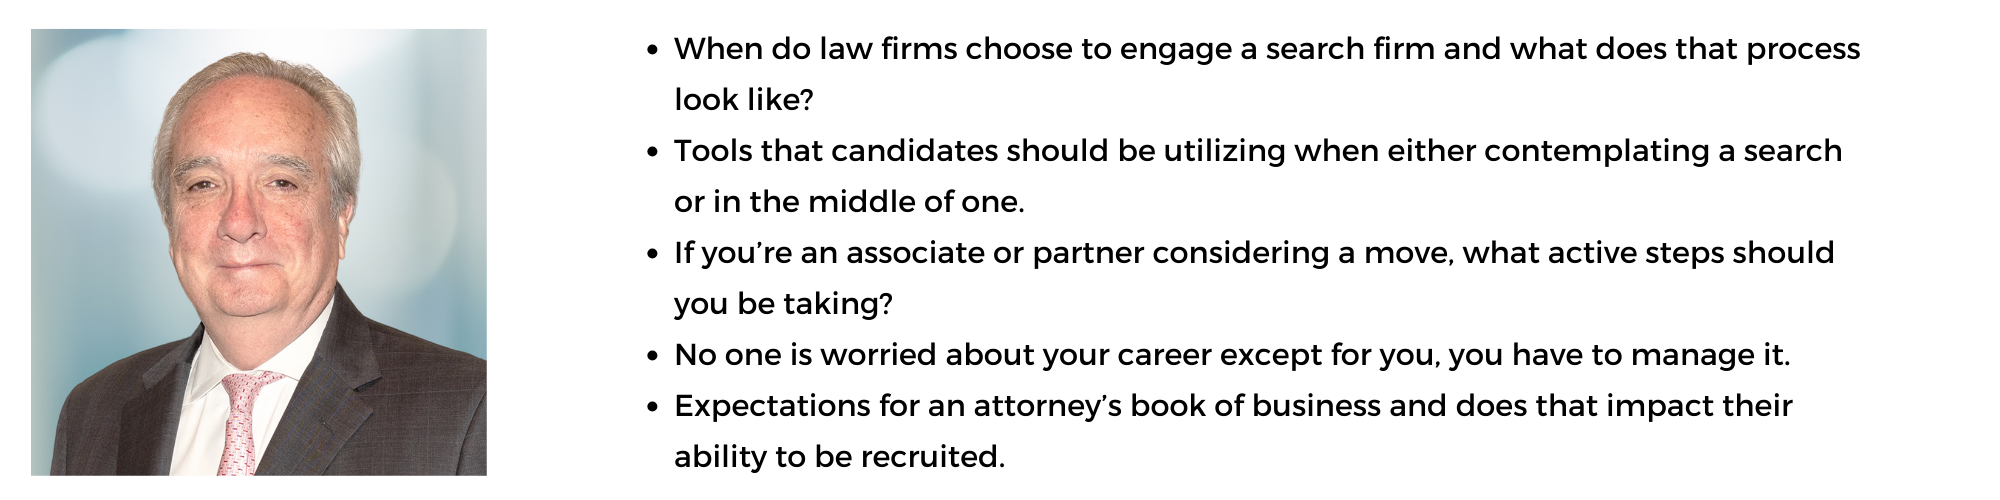 Brian Davis | Advancing Careers: Insights for Outside Counsel From a Legal Recruiter  